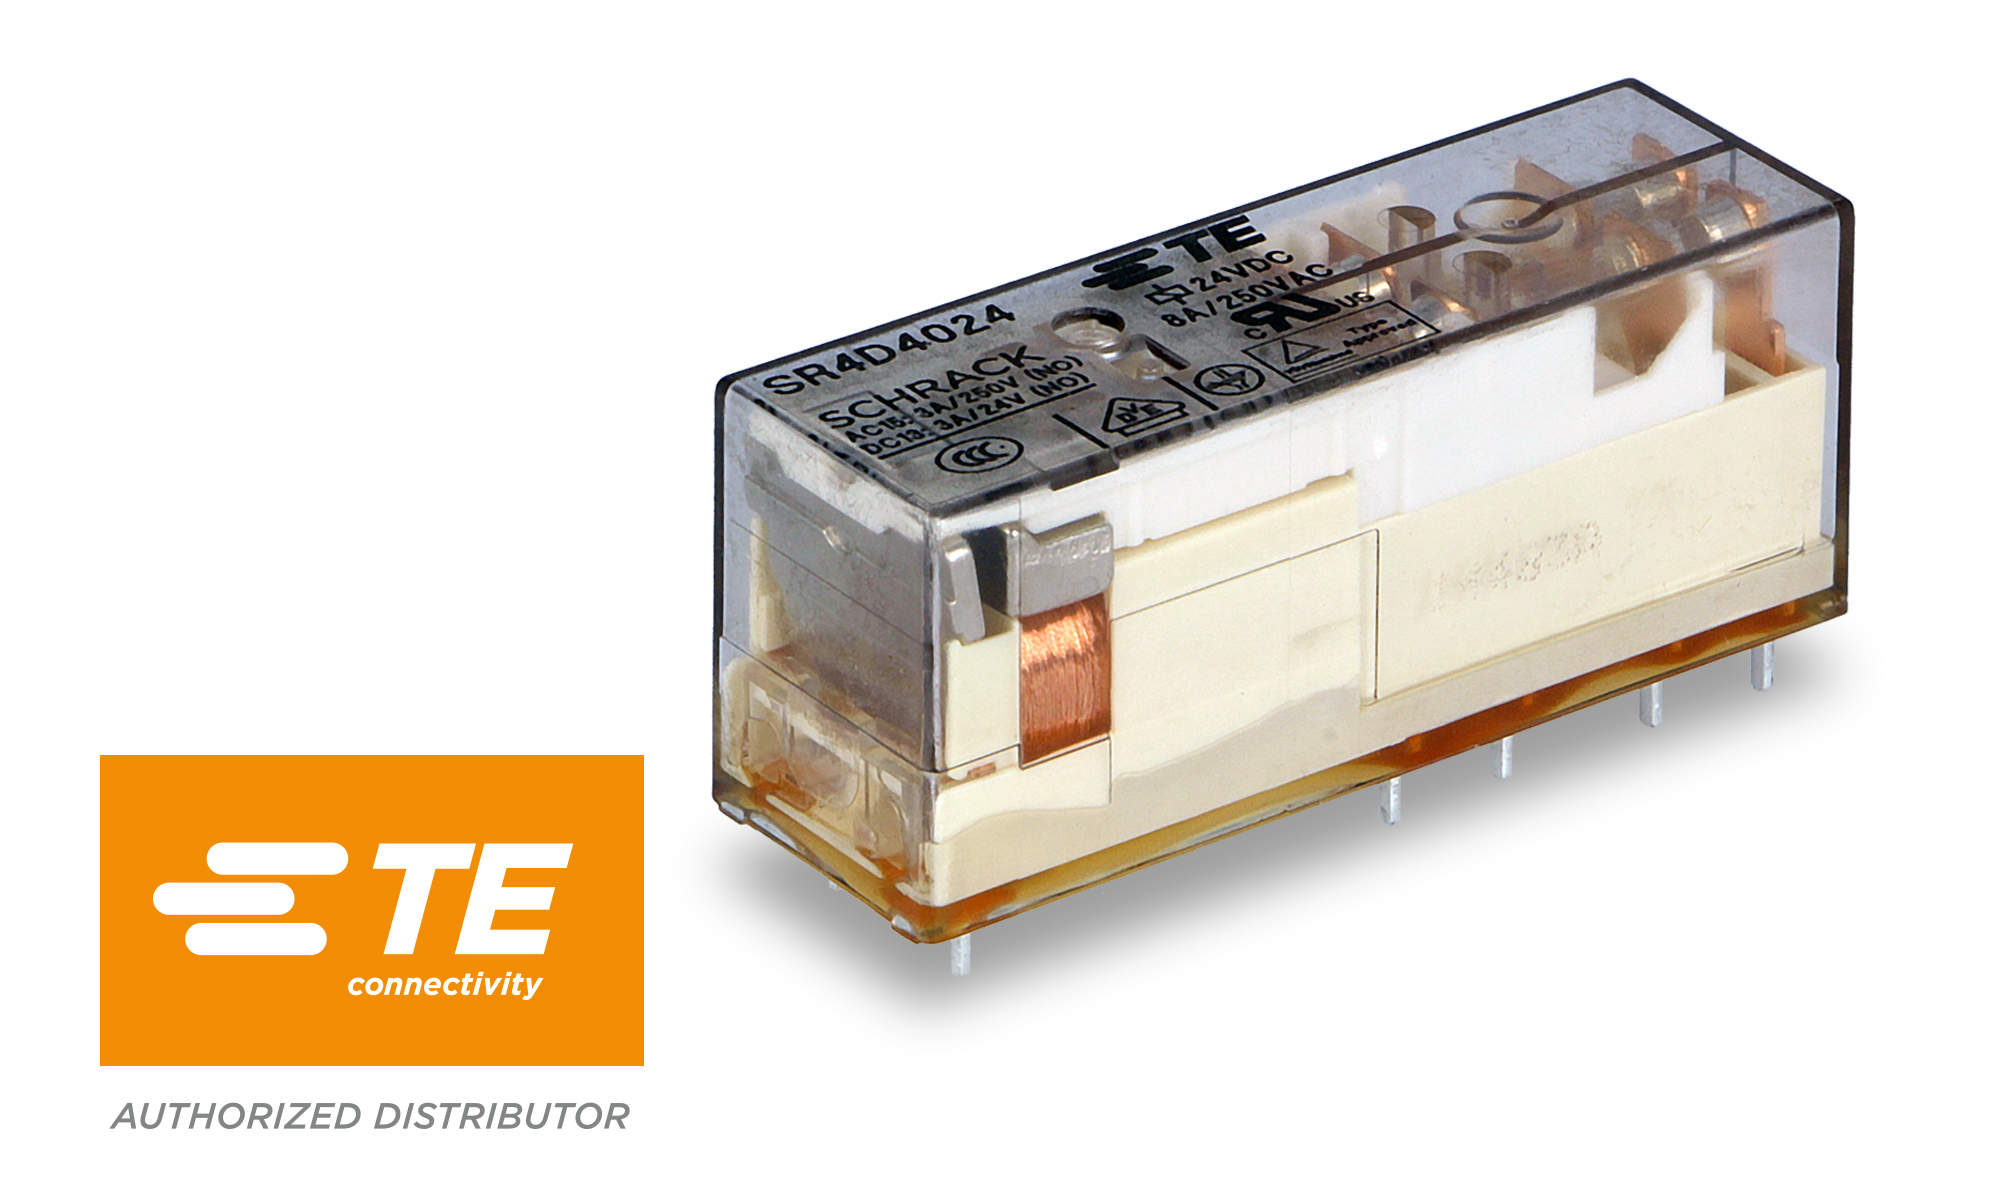 SR4D4024 safety relays by TE Connectivity